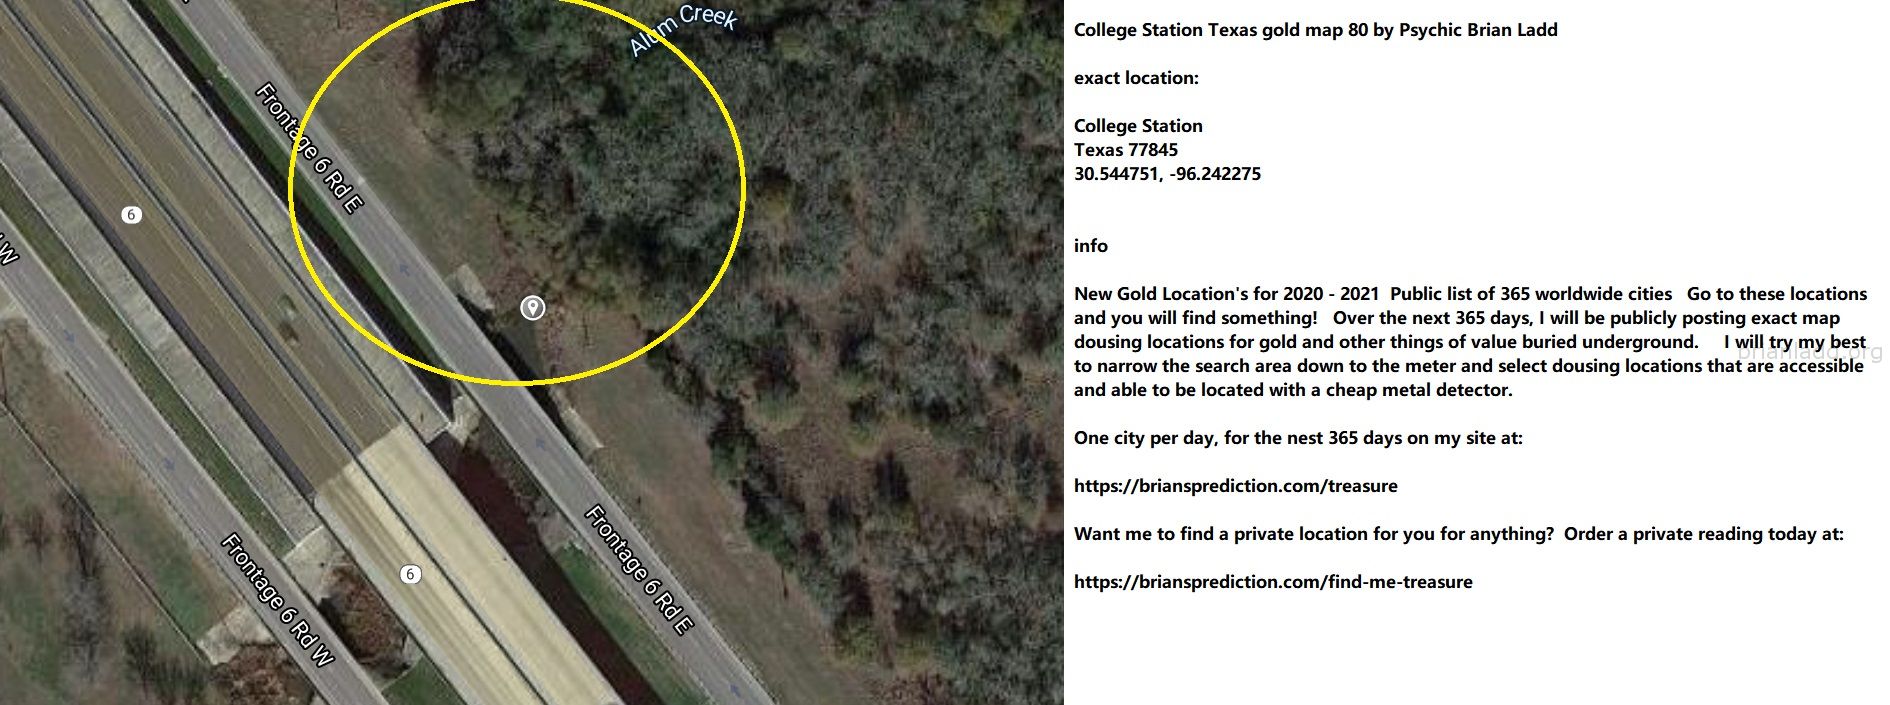 College Station Texas gold map 80 by Psychic Brian Ladd
New Gold Location's for 2020 - 2021  Public list of 365 worldwide cities   Go to these locations and you will find something!   Over the next 365 days, I will be publicly posting exact map dousing locations for gold and other things of value buried underground.     I will try my best to narrow the search area down to the meter and select dousing locations that are accessible and able to be located with a cheap metal detector. One city per day, for the nest 365 days on my site at:  https://briansprediction.com/treasure  Want me to find a private location for you for anything?  Order a private reading today at:  https://briansprediction.com/find-me-treasure
